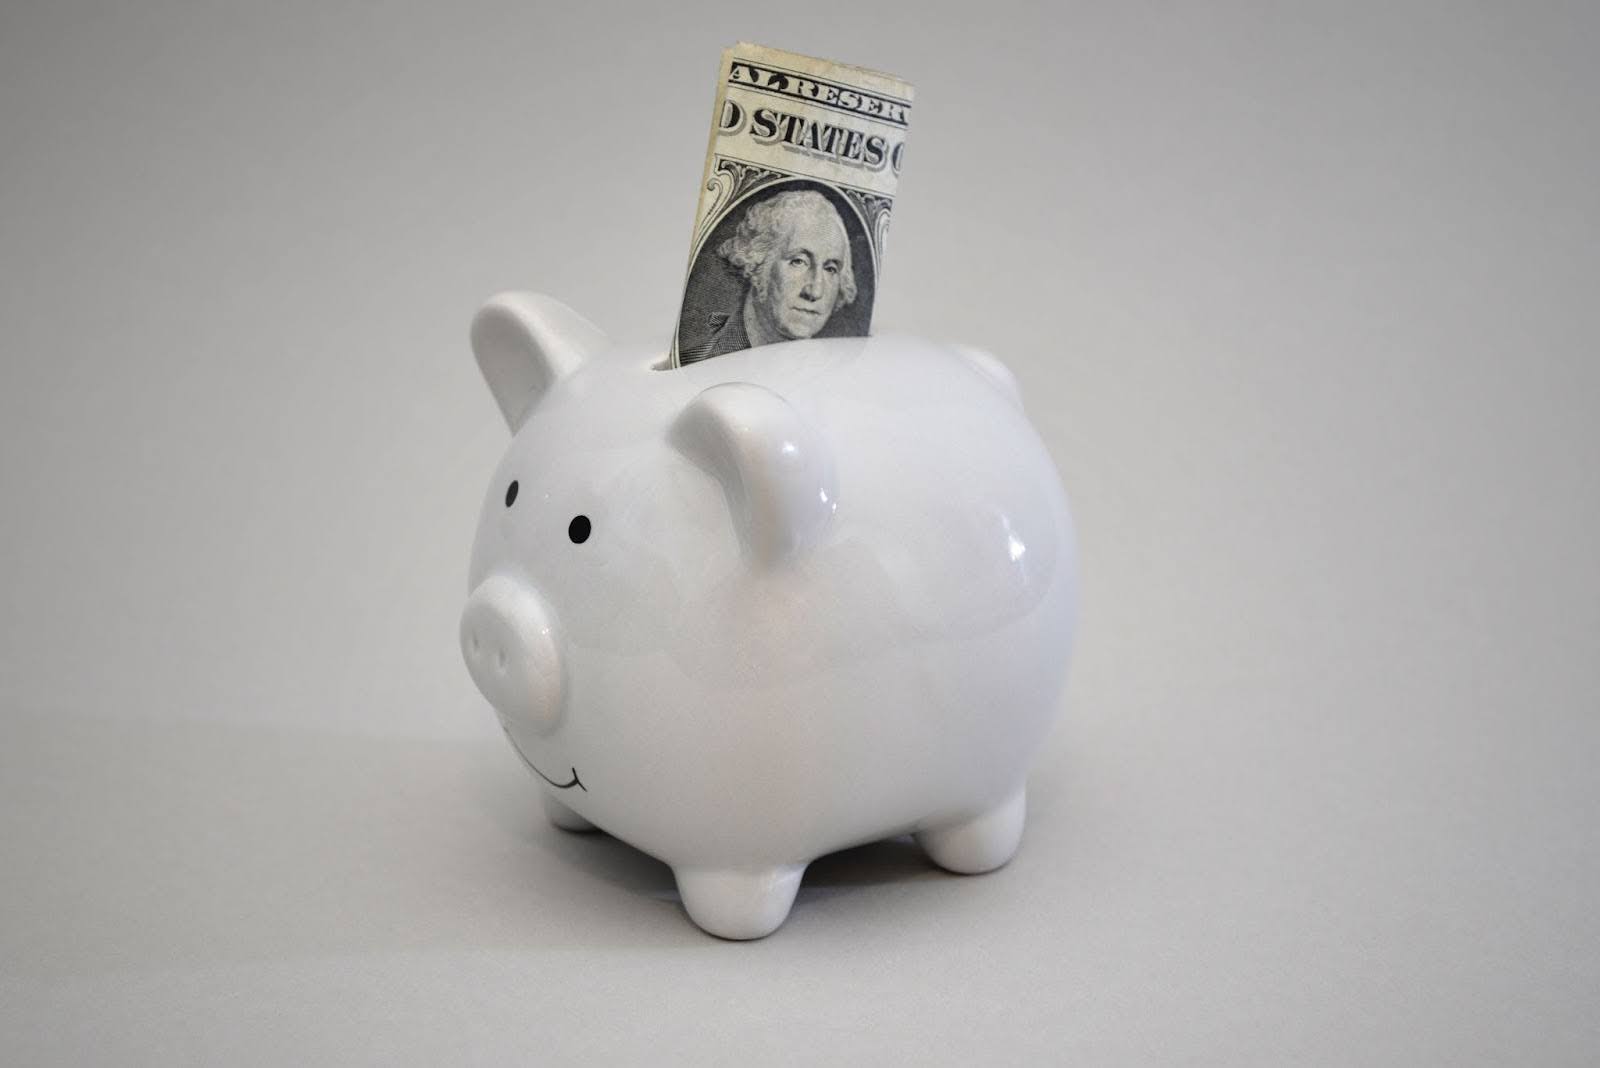 White ceramic piggy bank with dollar bill sticking out